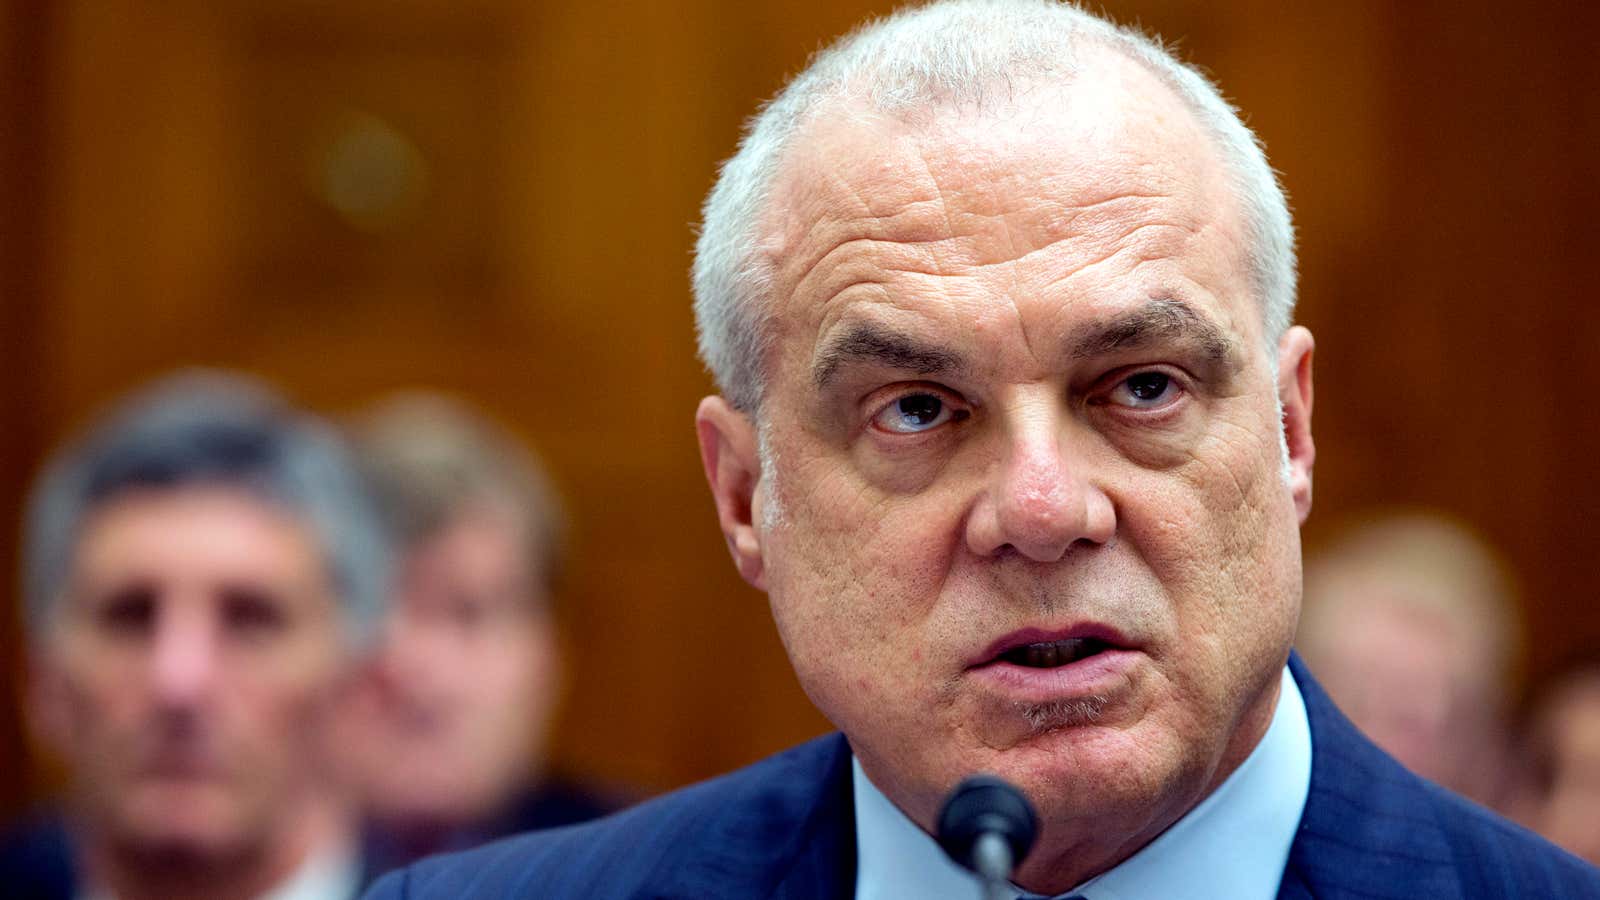 Aetna CEO Mark Bertolini is done with Obamacare’s marketplaces.